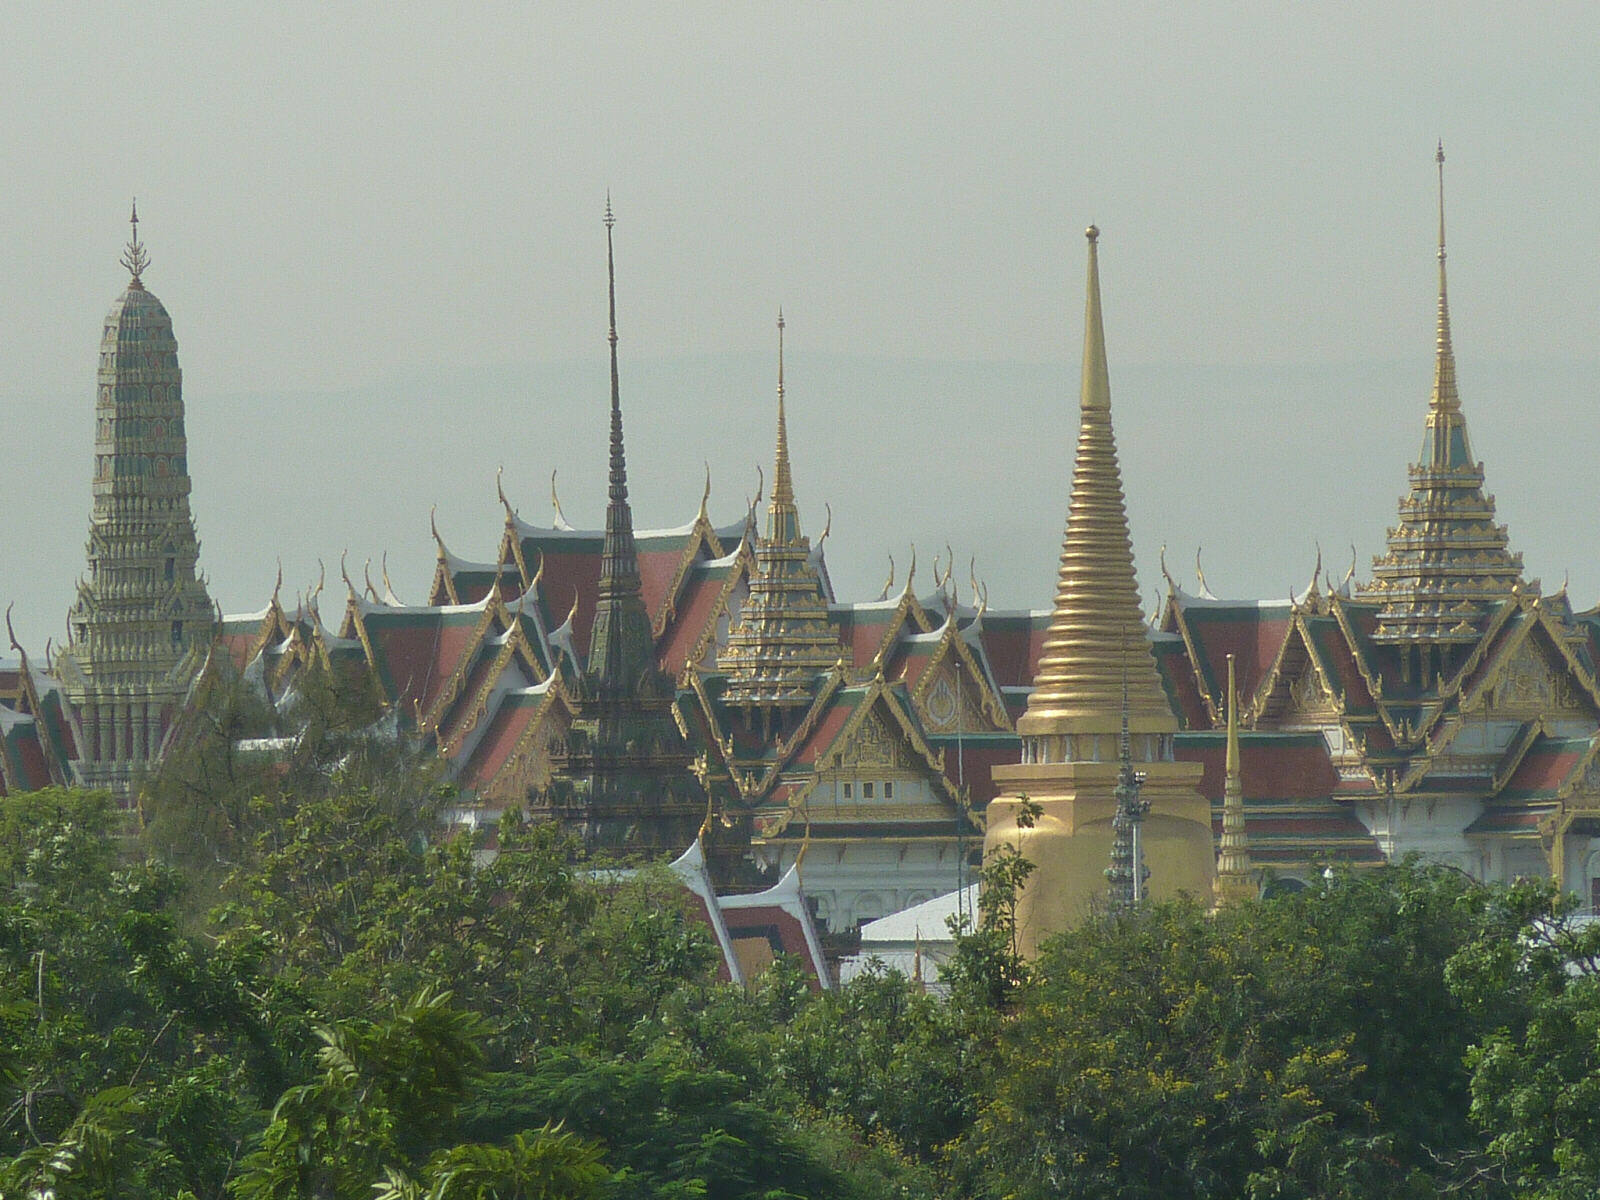 Grand Palace from Dang Derm in the Park hotel, Bangkok